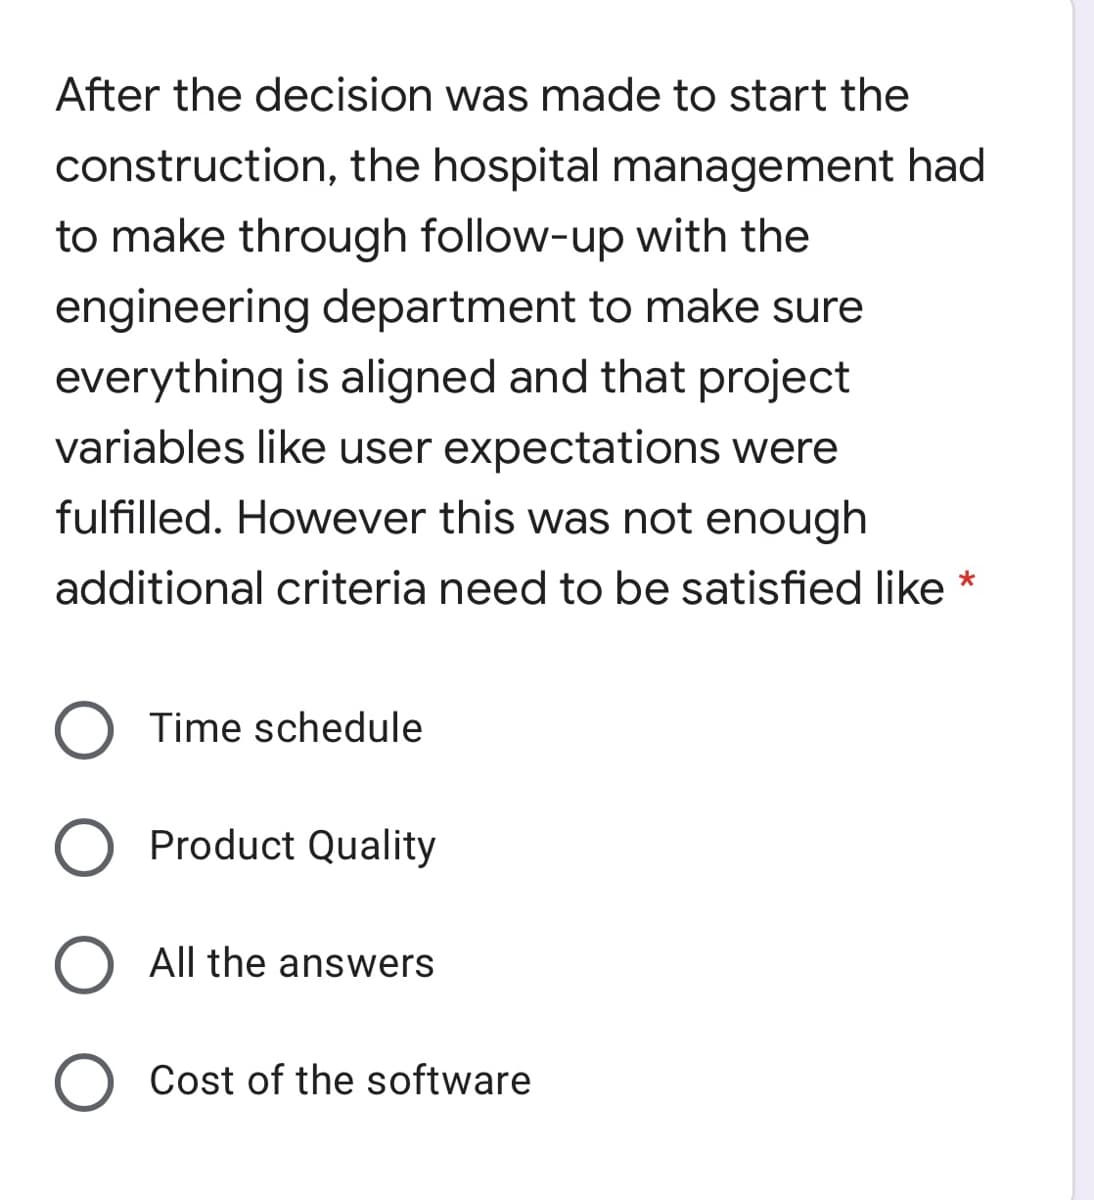 After the decision was made to start the
construction, the hospital management had
to make through follow-up with the
engineering department to make sure
everything is aligned and that project
variables like user expectations were
fulfilled. However this was not enough
additional criteria need to be satisfied like *
Time schedule
O Product Quality
O All the answers
Cost of the software
